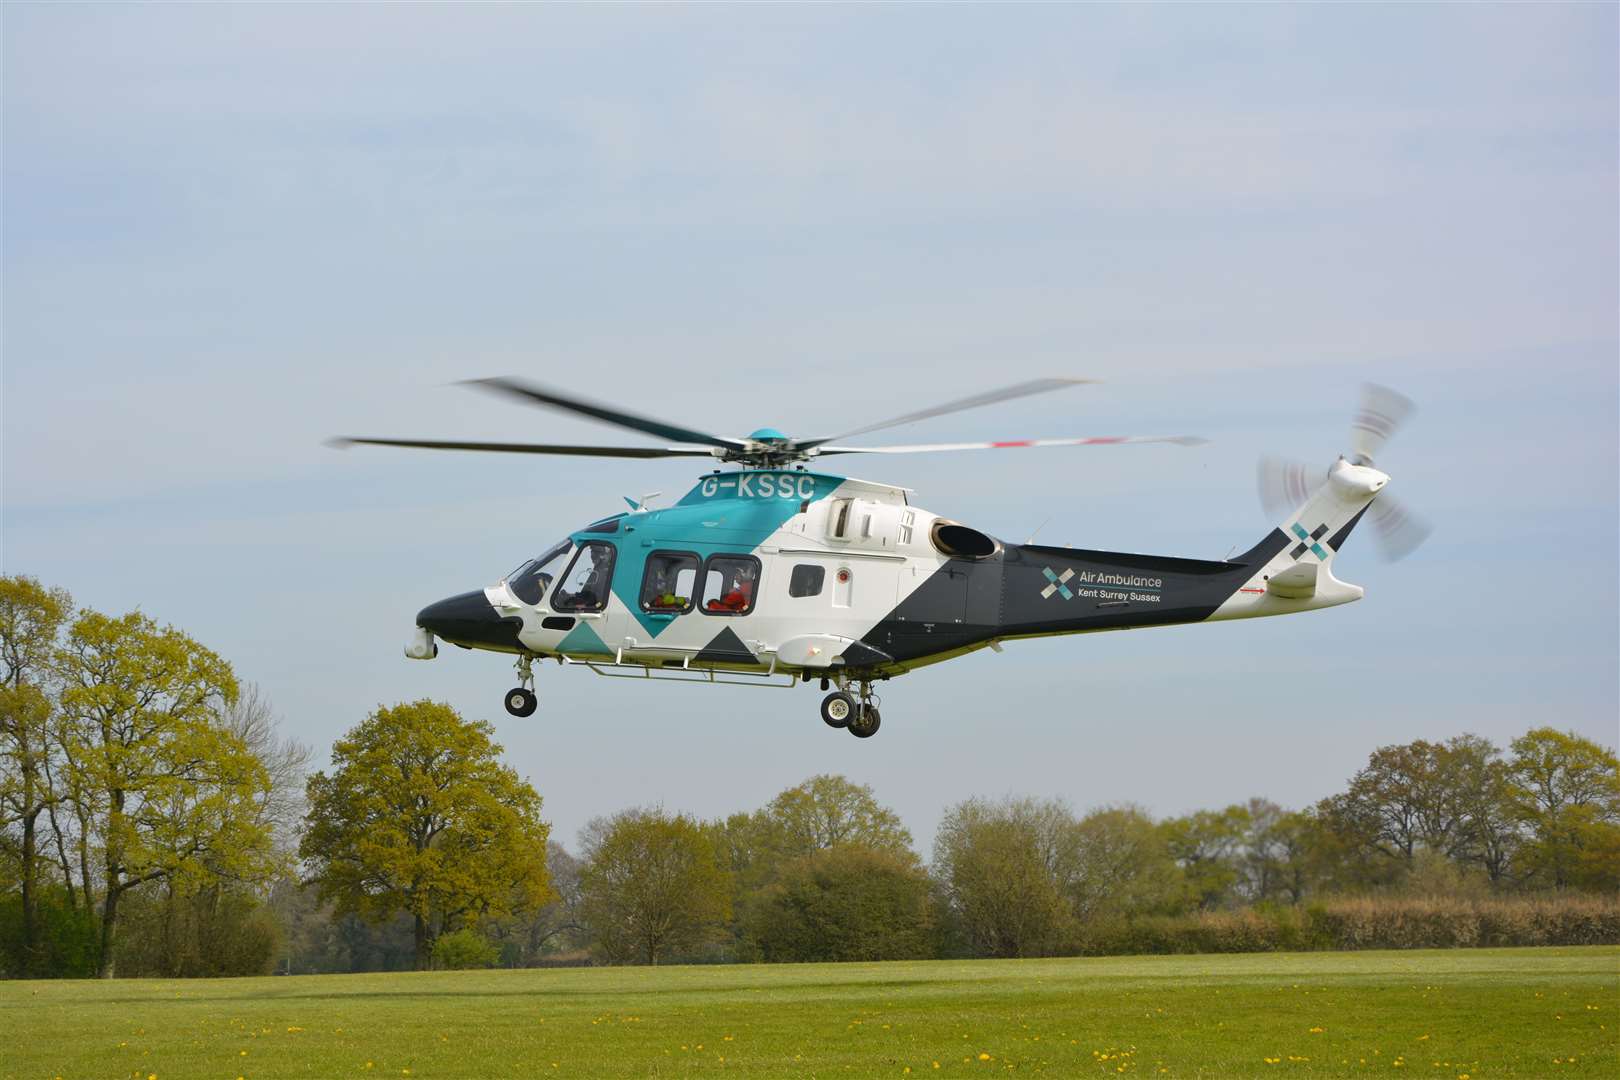 Air Ambulance Kent Surrey Sussex (KSS) says it urgently needs to raise more than £500,000 to survive the Covid-19 pandemic